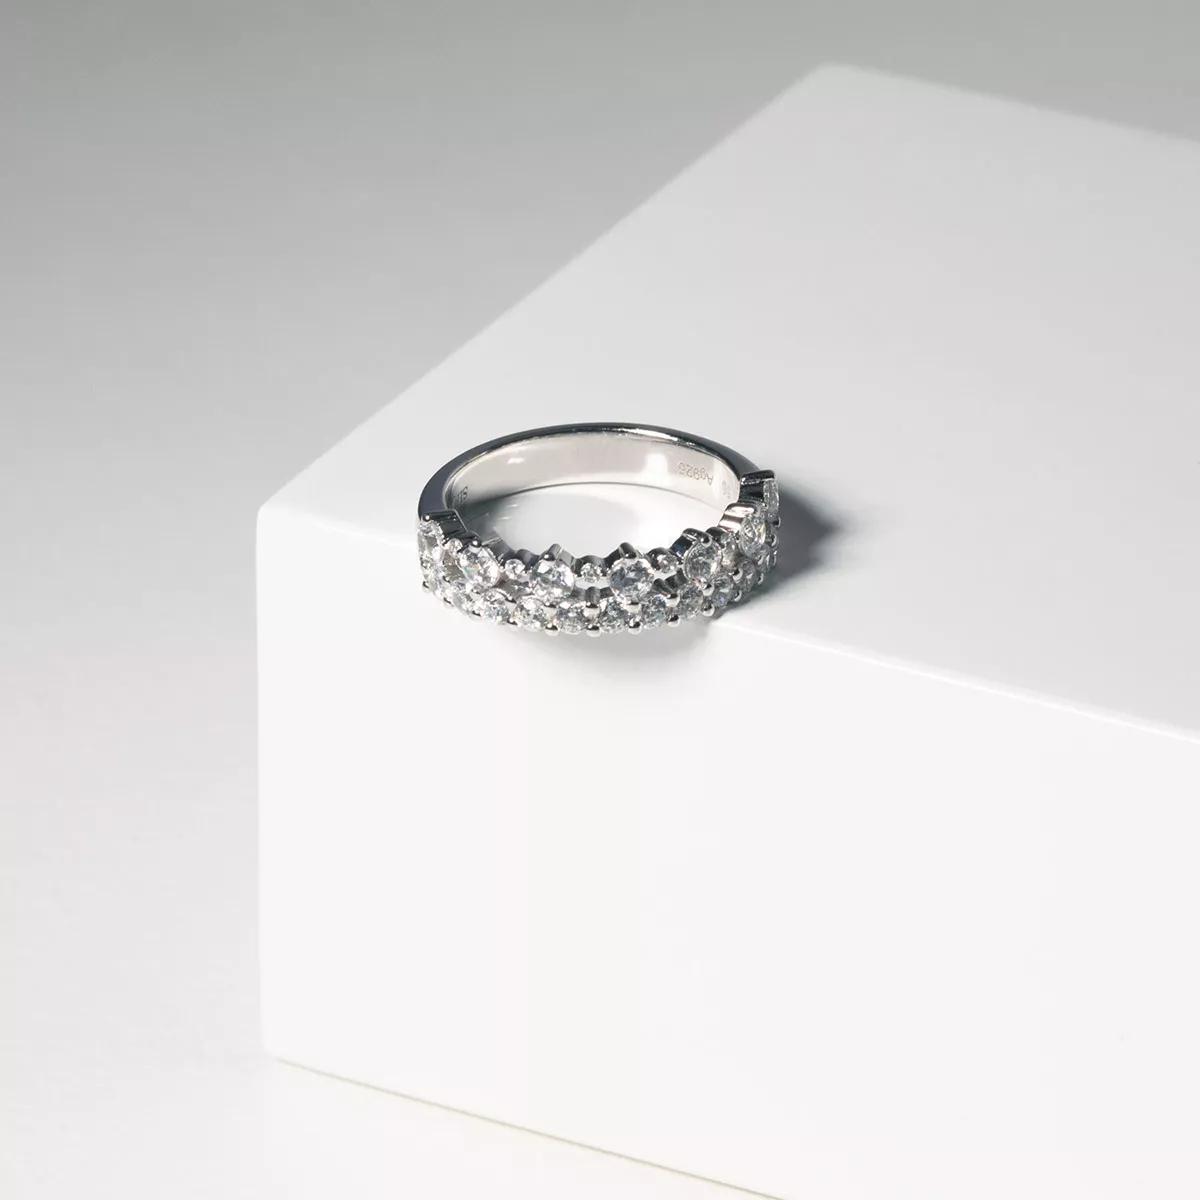 Sif Jakobs Jewellery Ring - Livigno Ring - Gr. 56 - in Silber - für Damen von Sif Jakobs Jewellery